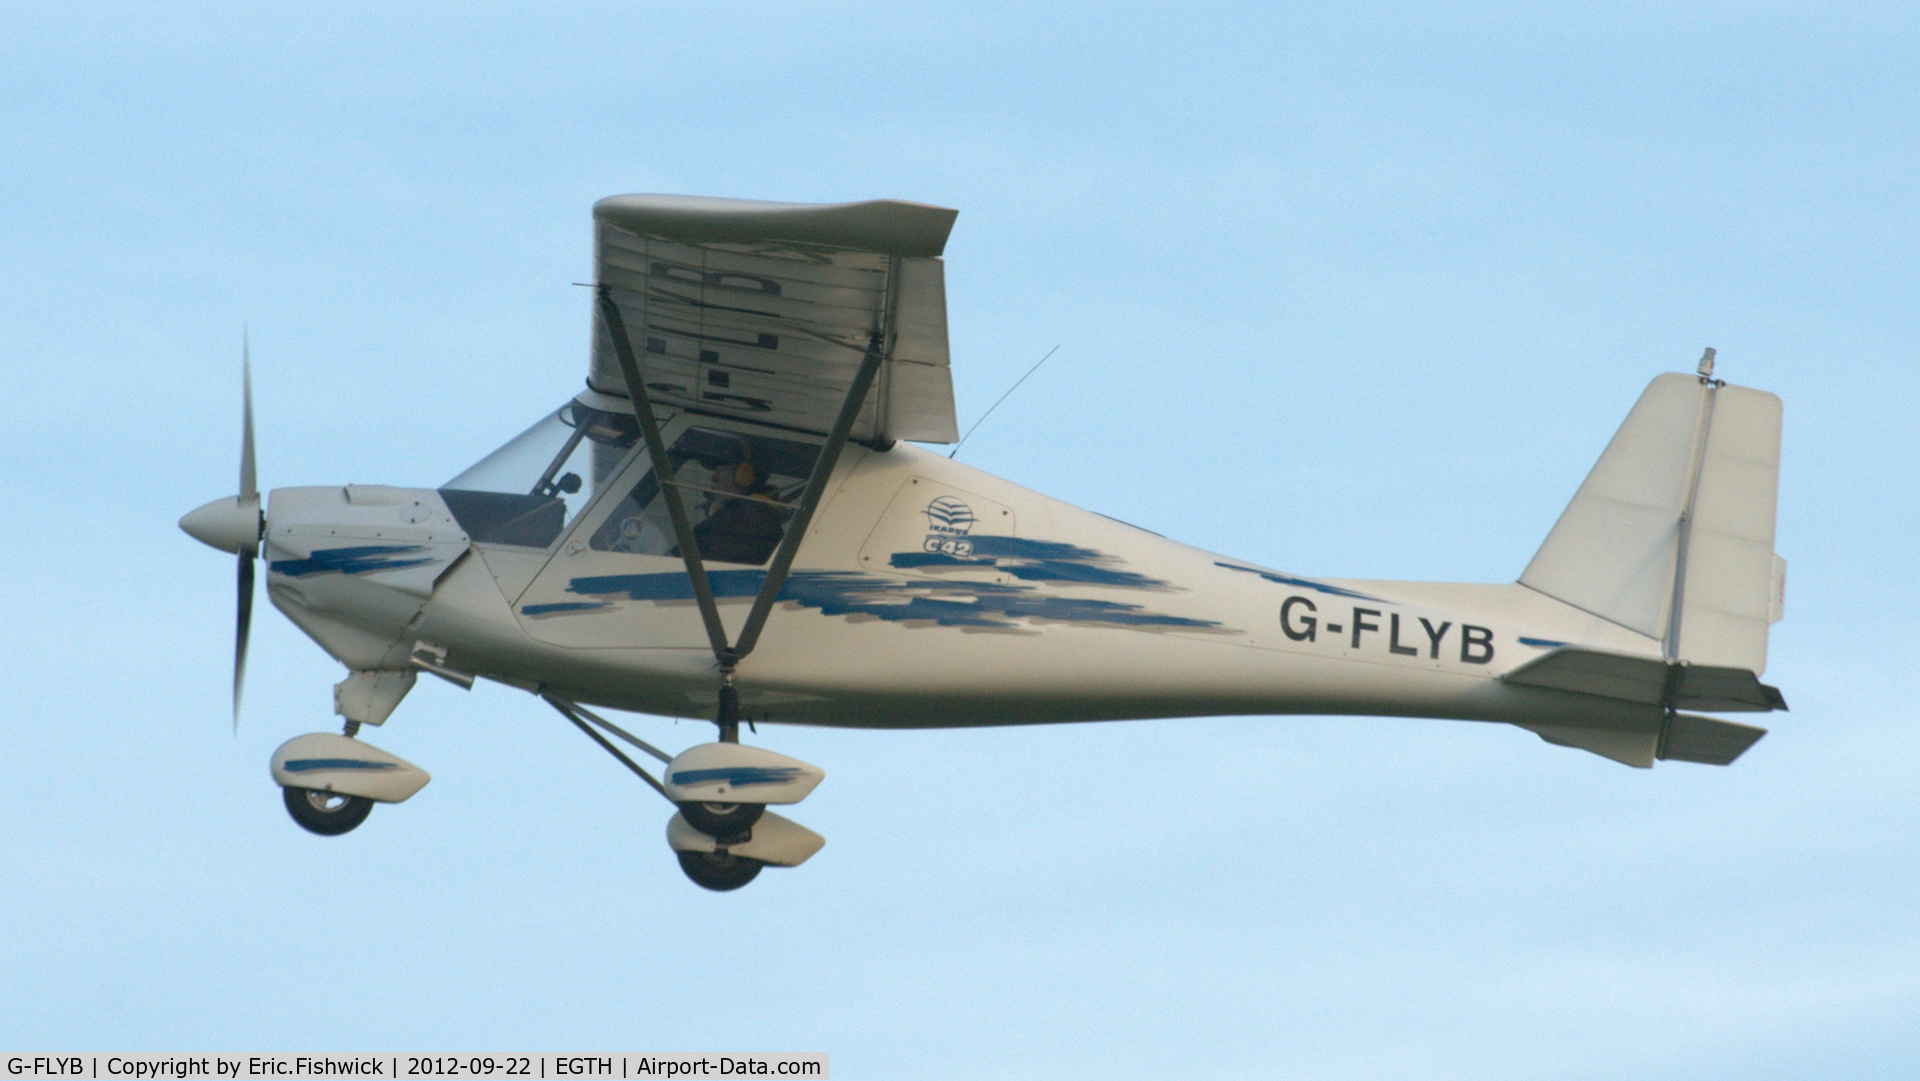 G-FLYB, 2003 Comco Ikarus C42 FB100 C/N 0309-6572, 41. G-FLYB departing Shuttleworth Uncovered - Air Show, Sept. 2012.